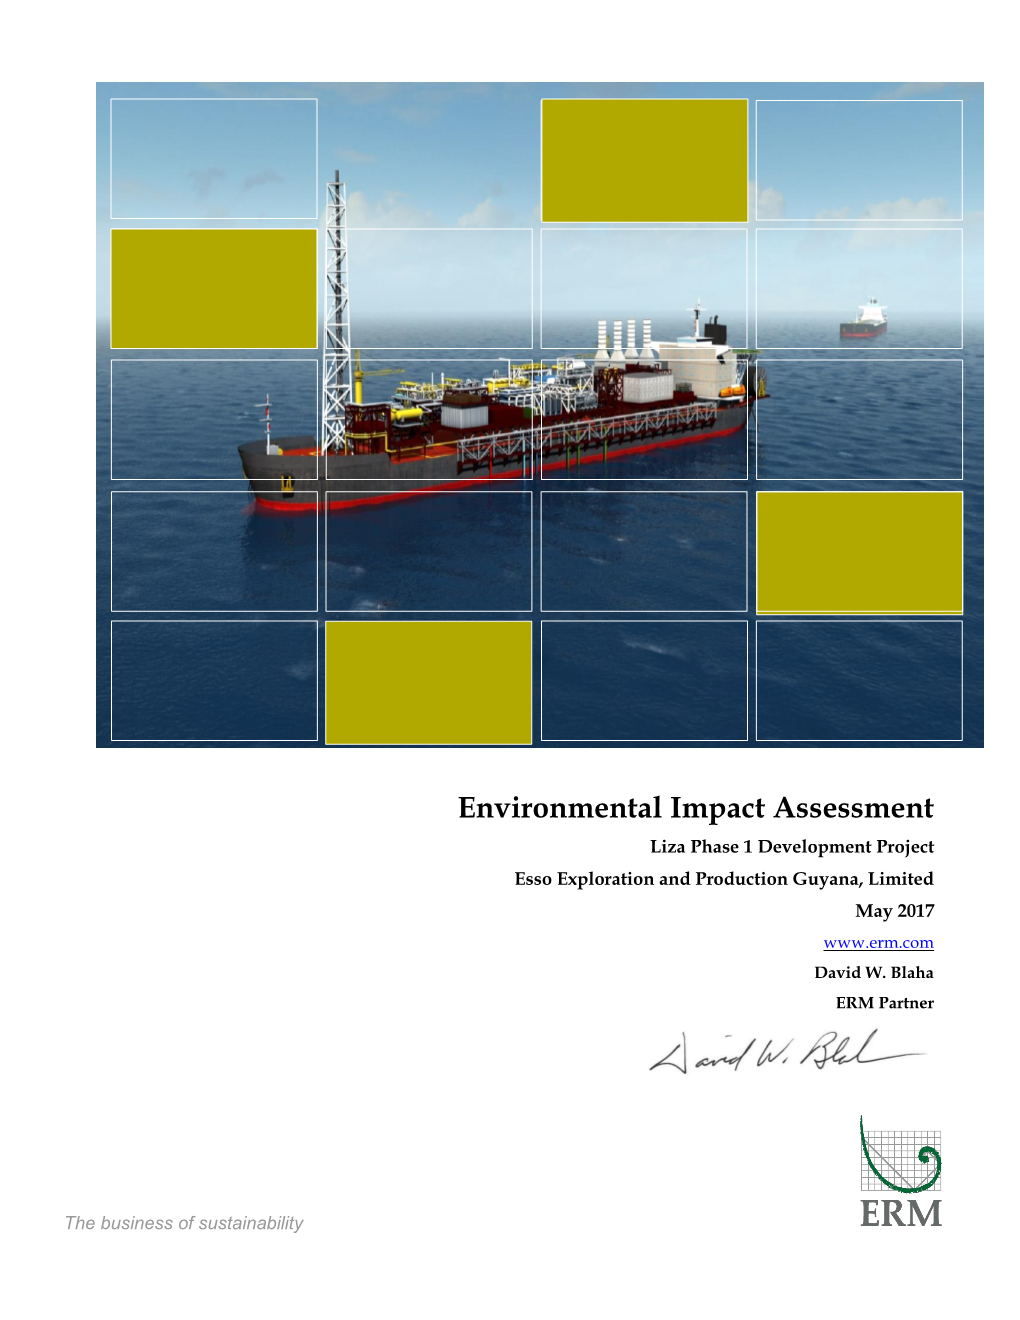 Environmental Impact Assessment for Liza Phase 1